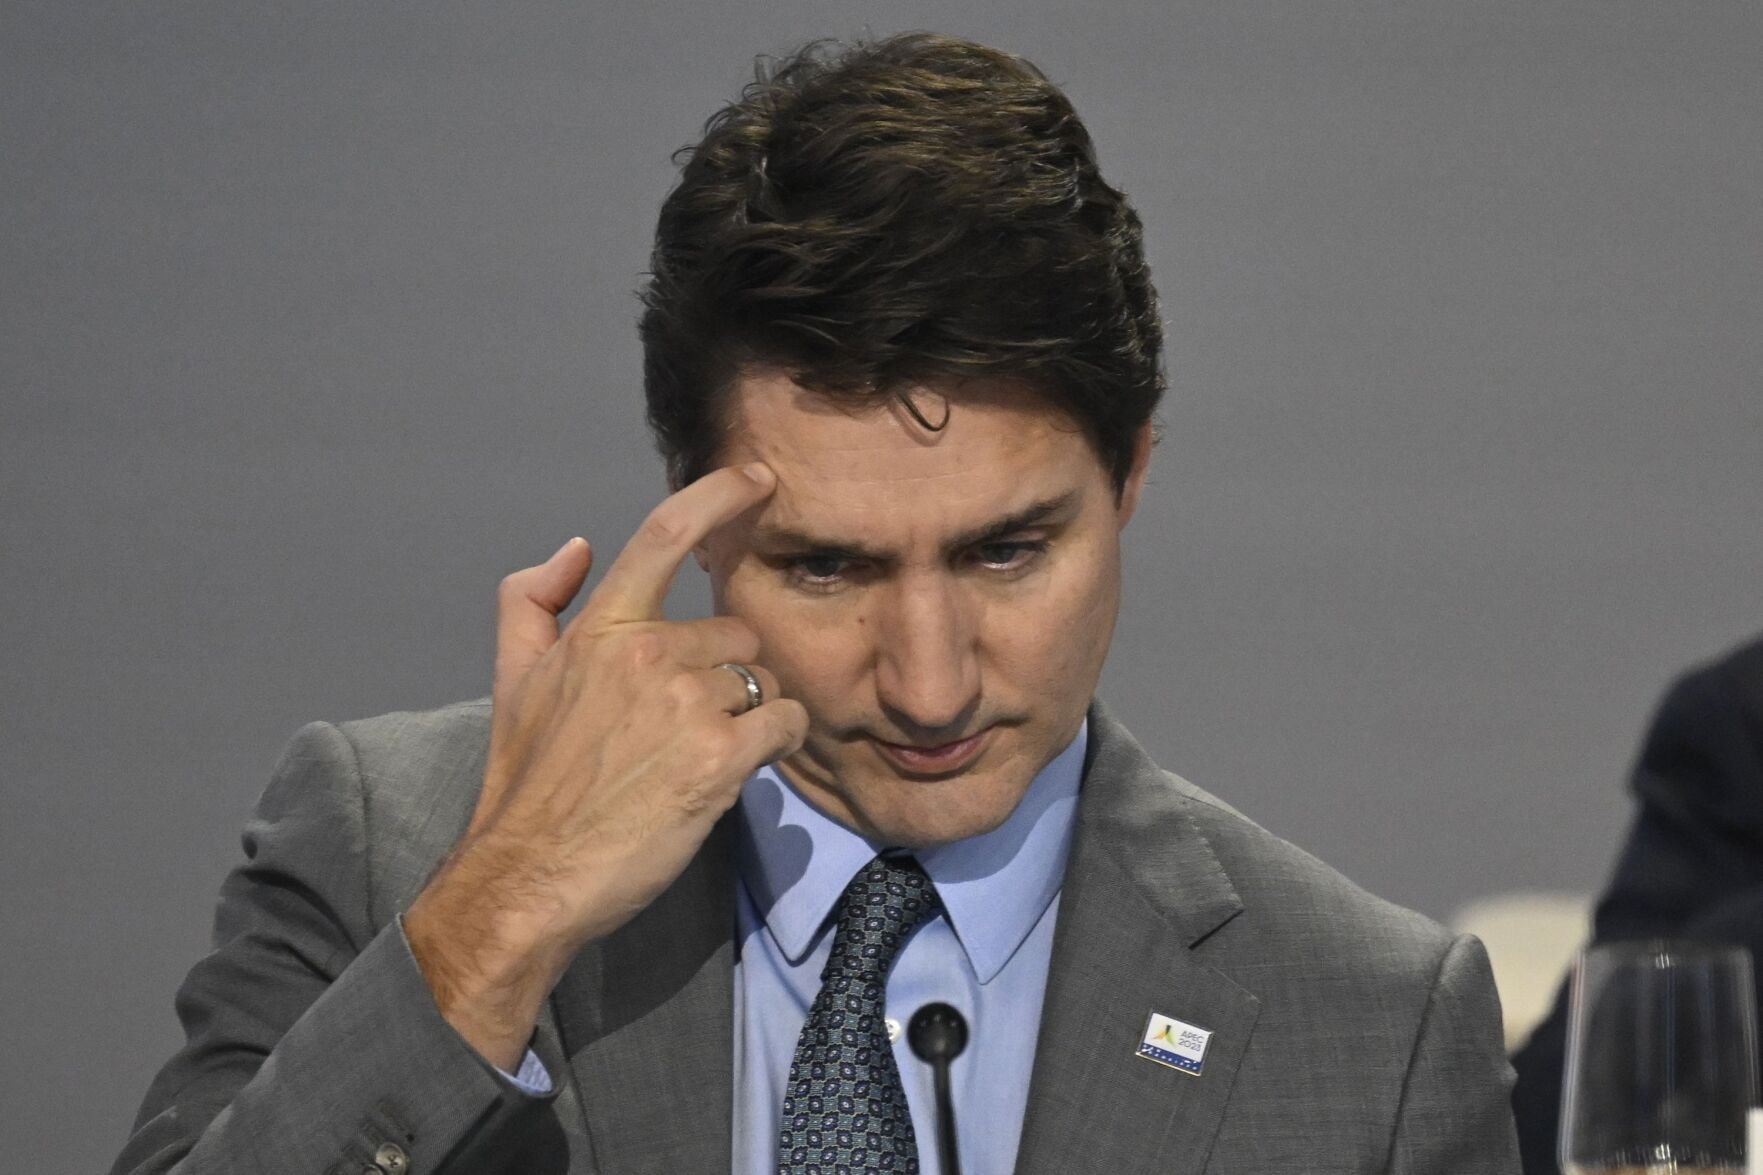 Justin Trudeau and his Liberals hit new lows in support, poll suggests